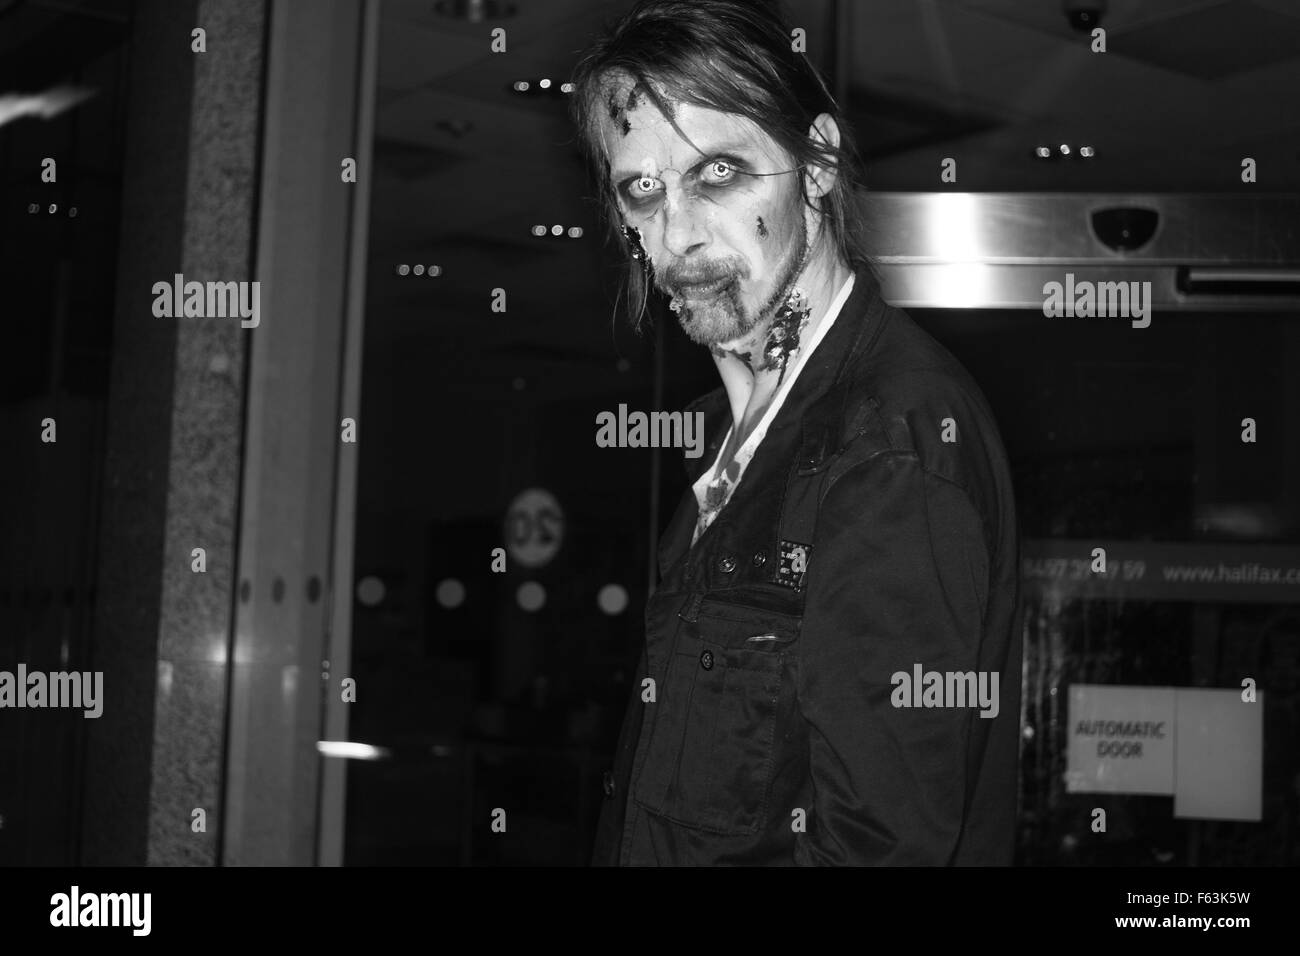 People photographed on the street  with their Halloween make up  and costumes London 2015 Stock Photo